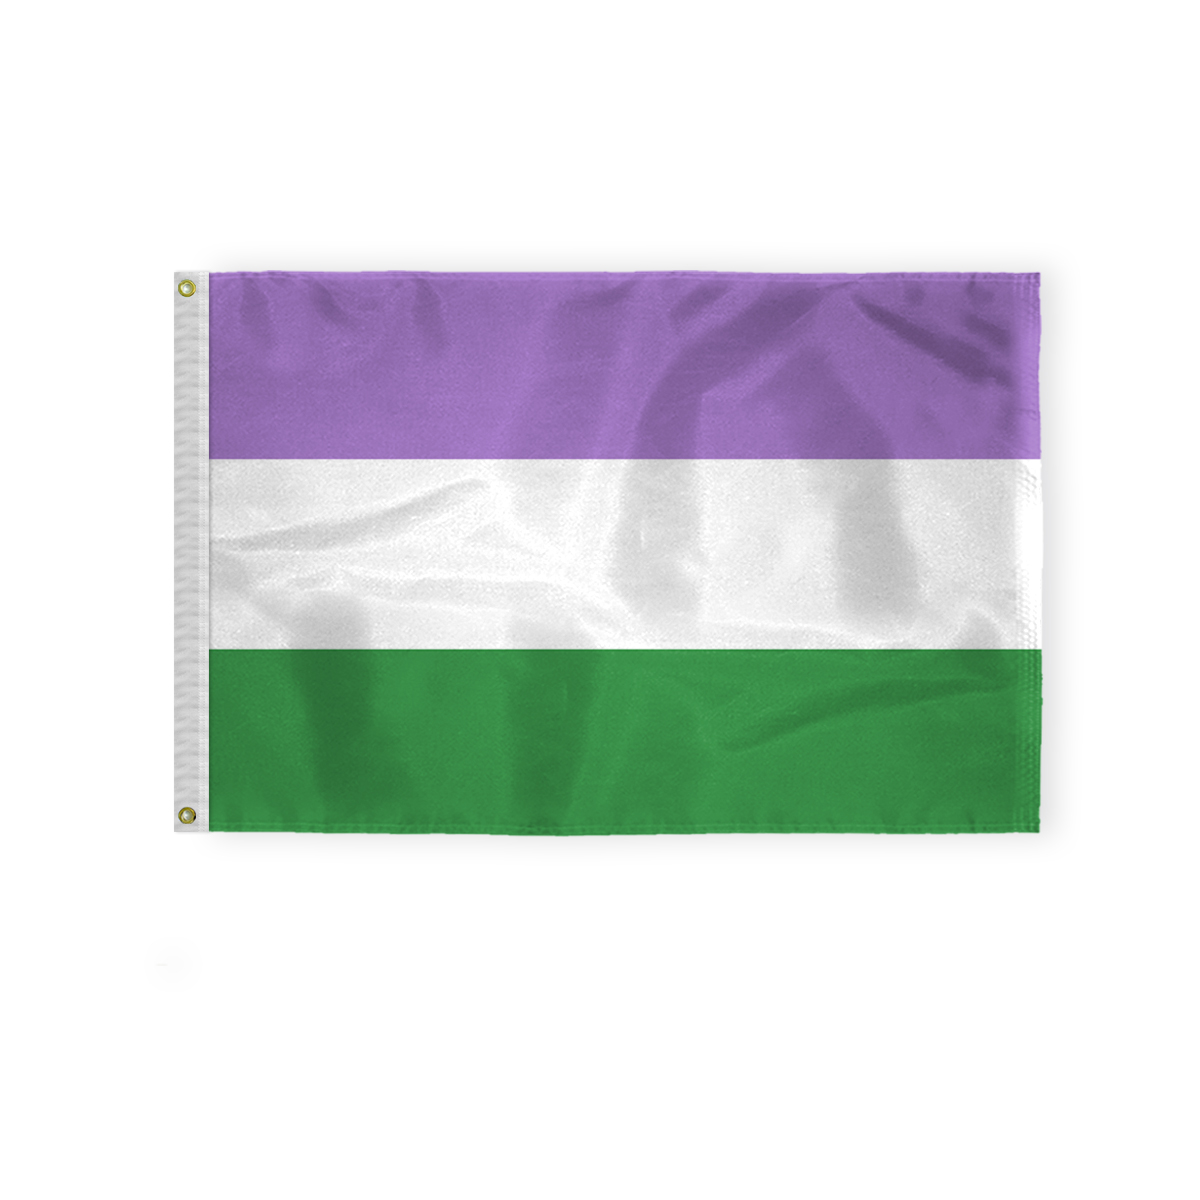 AGAS Genderqueer Pride Flag 2x3 Ft - Double Sided Printed 200D Nylon